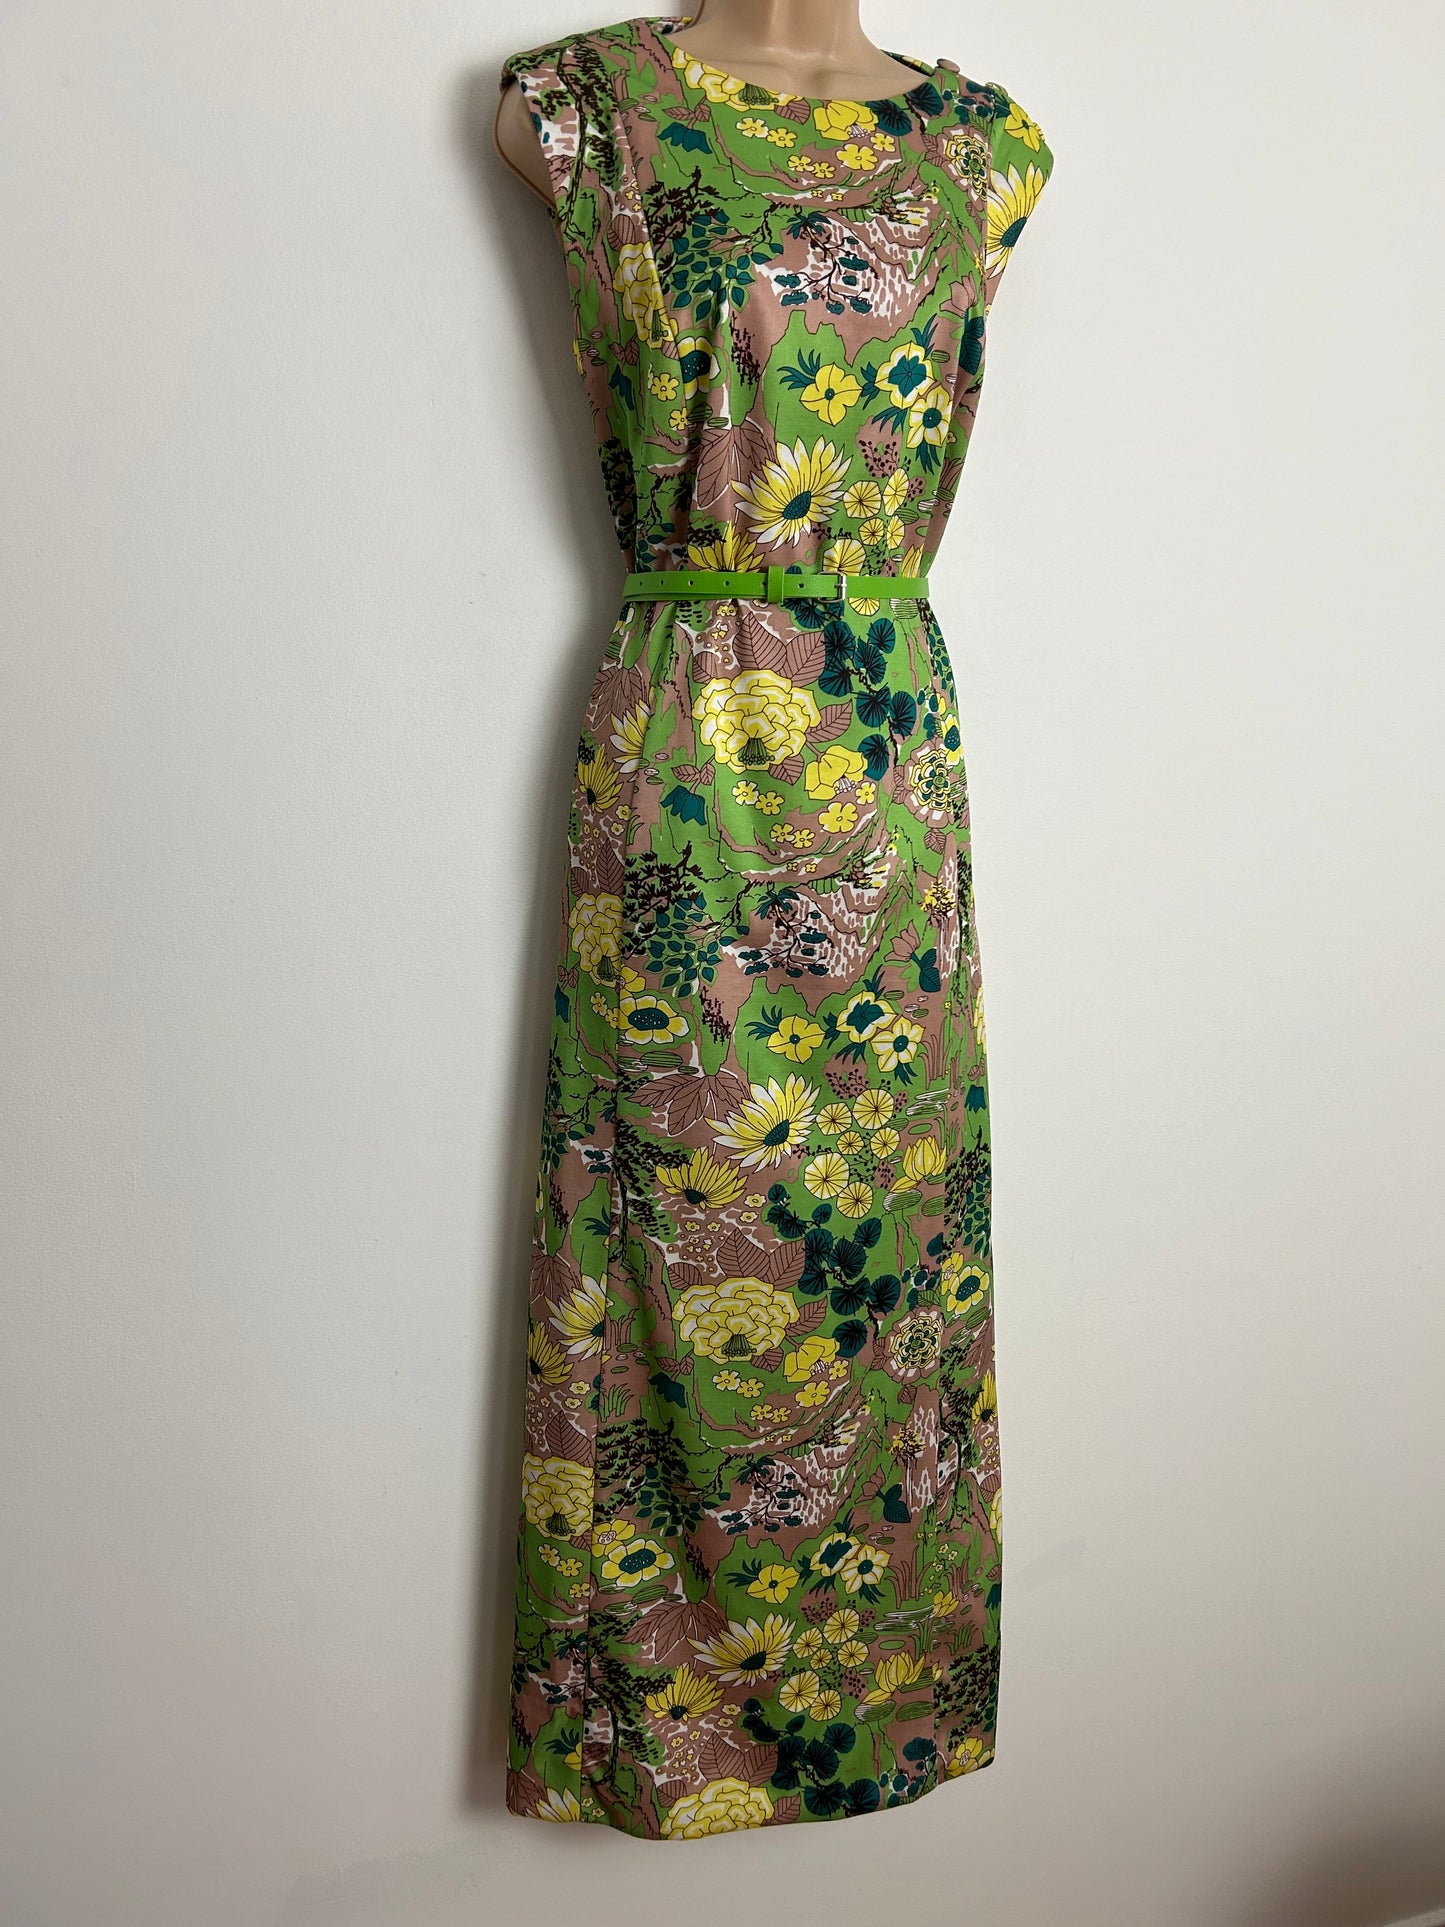 Vintage 1970s LEADING LADY UK Size 14-16 Green Yellow & Mocha Psychedelic Floral Waterlily Print Maxi Dress